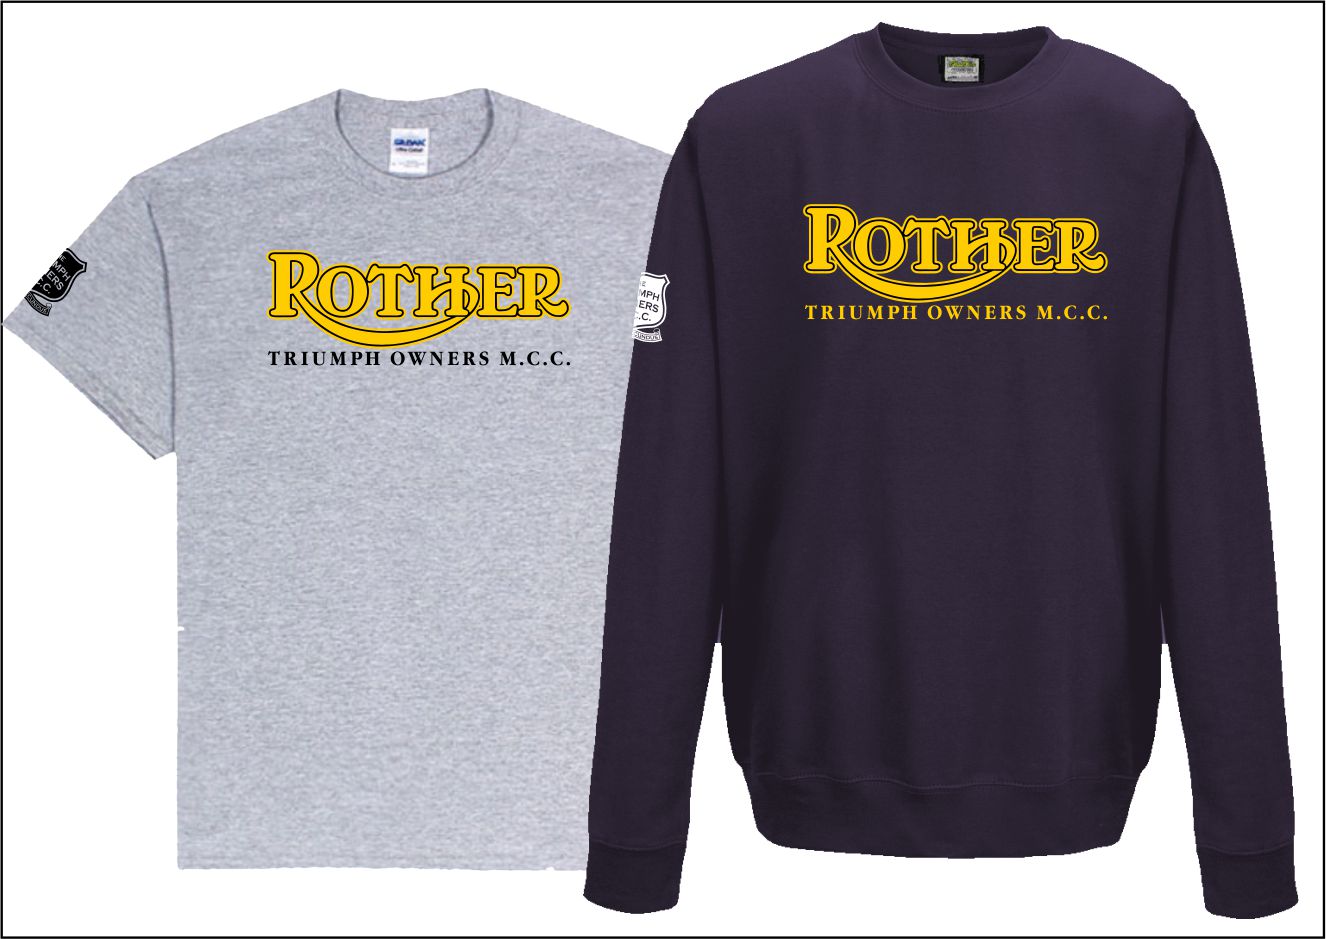 Rother merchandise